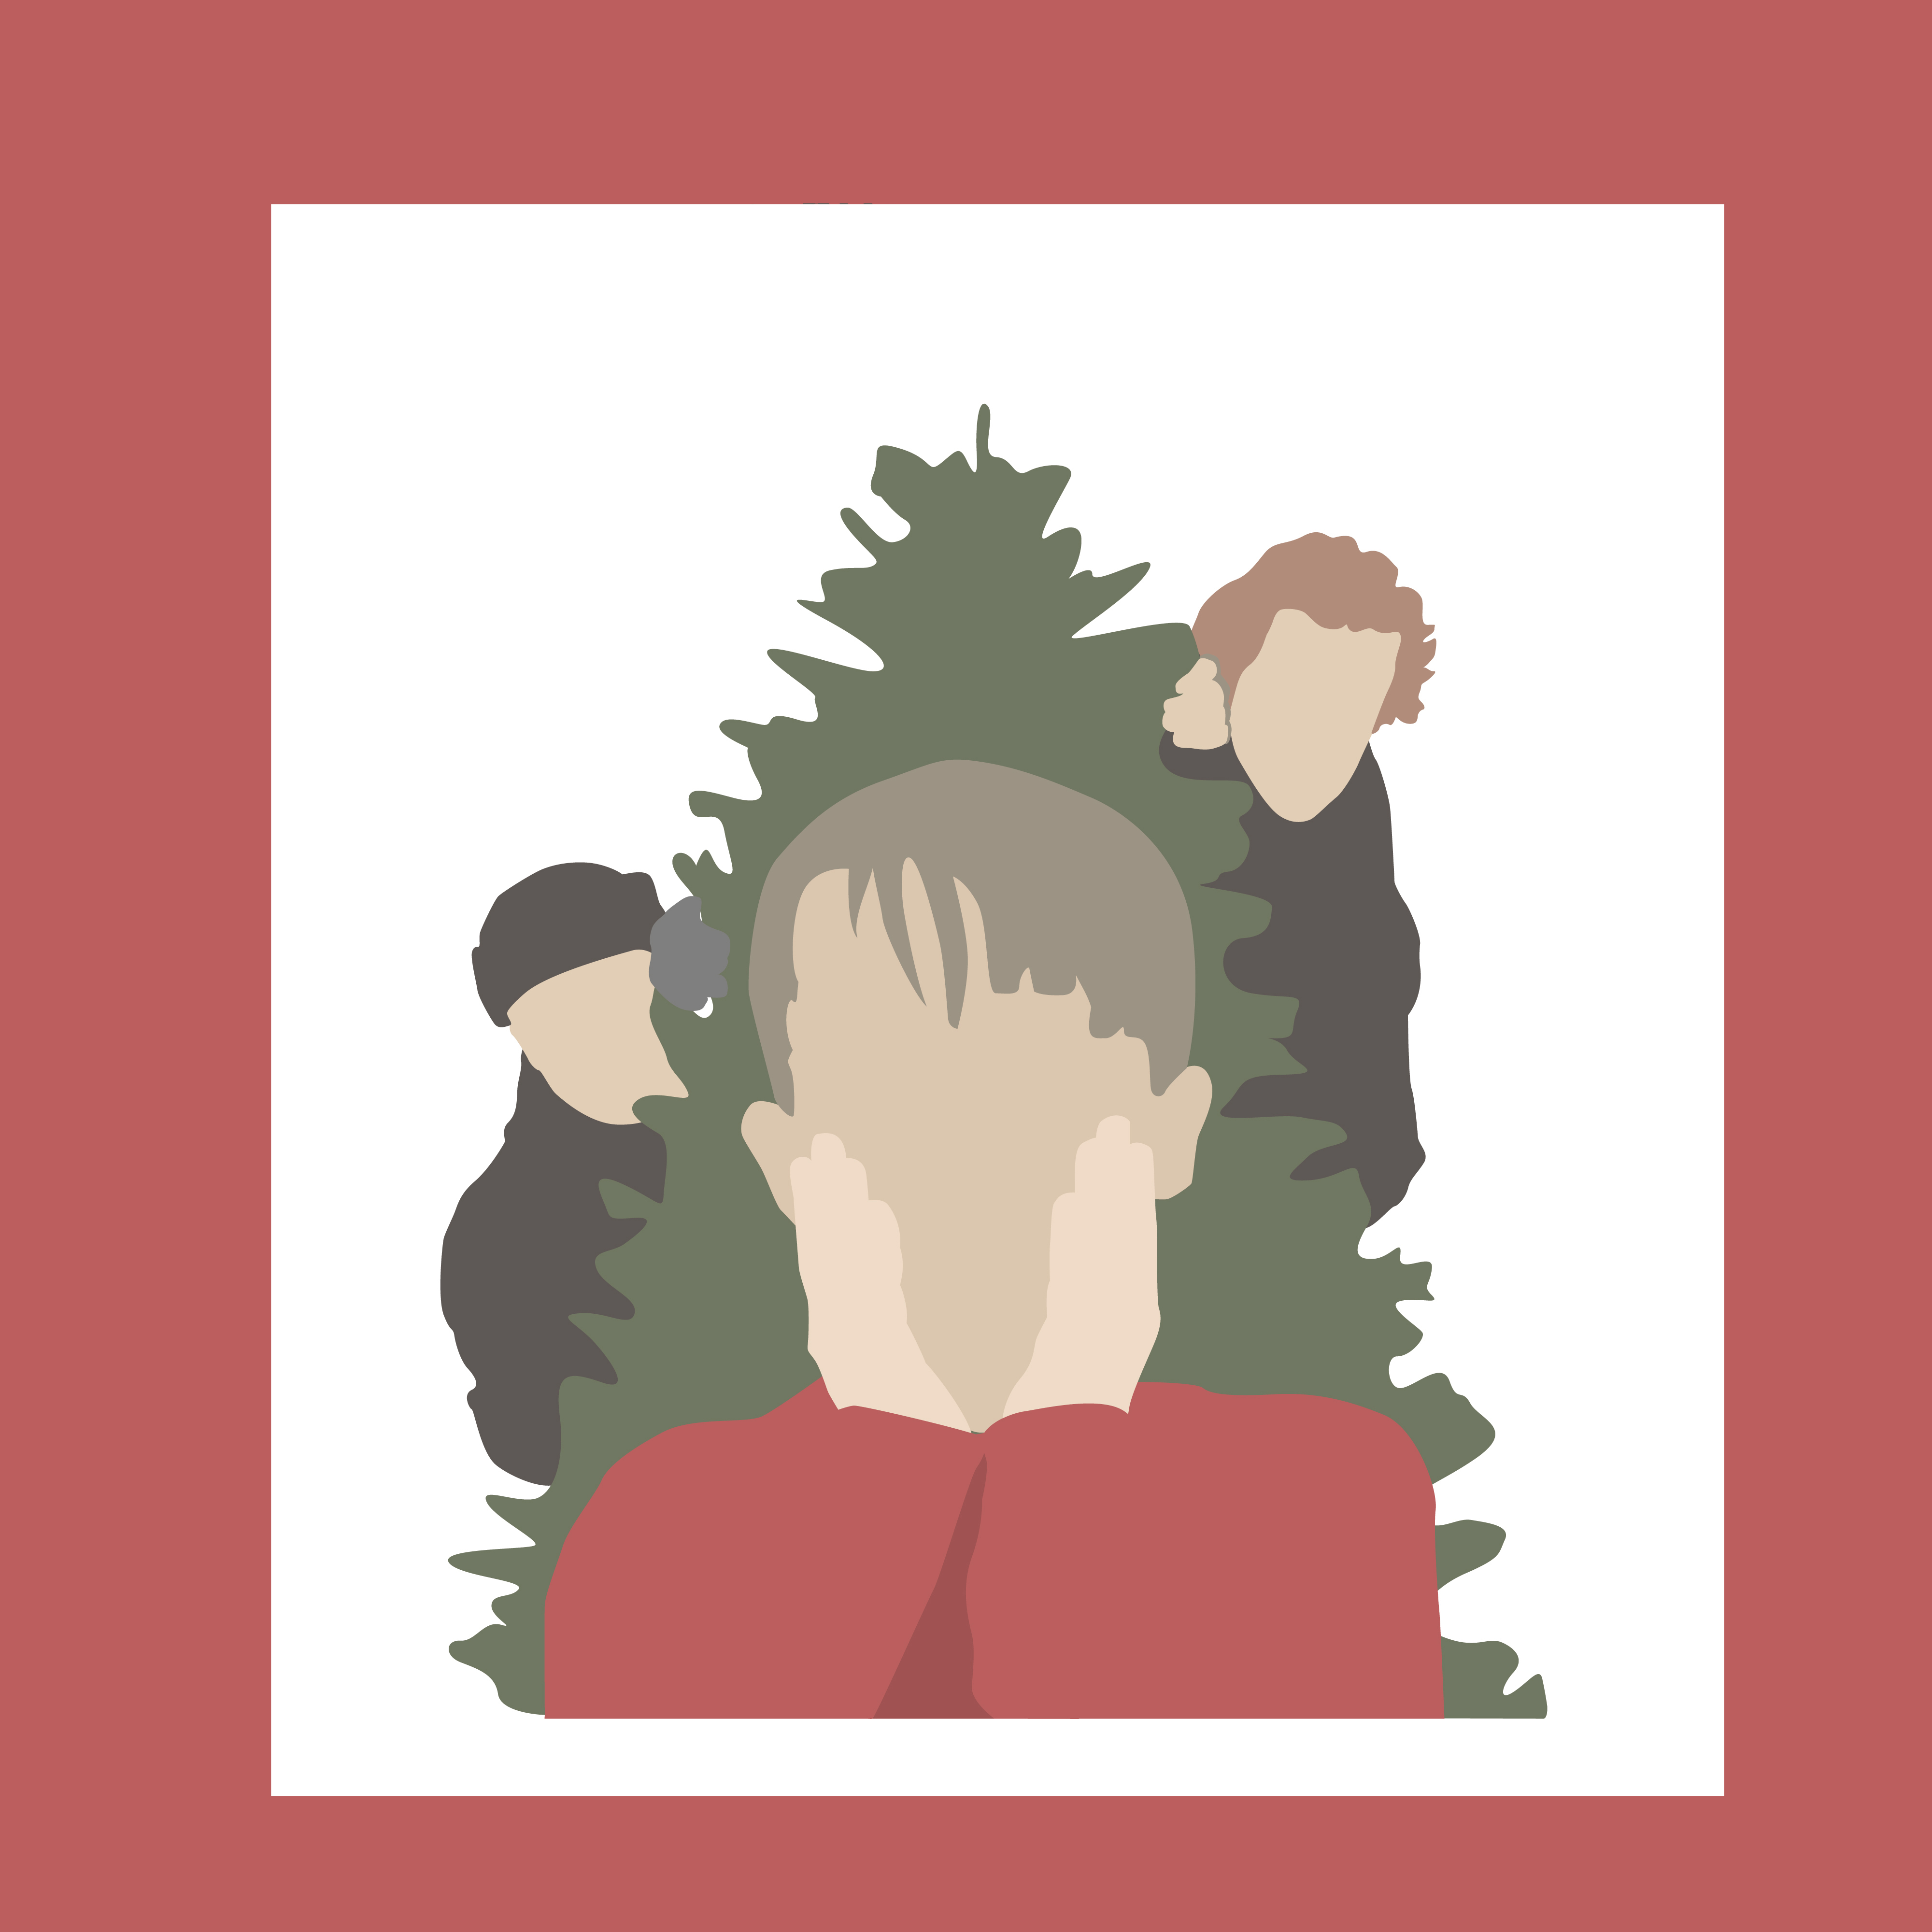 Illustration of a child in front of a Christmas tree, his hands on his face. In the background are two men, one short with a hat, and the other tall.